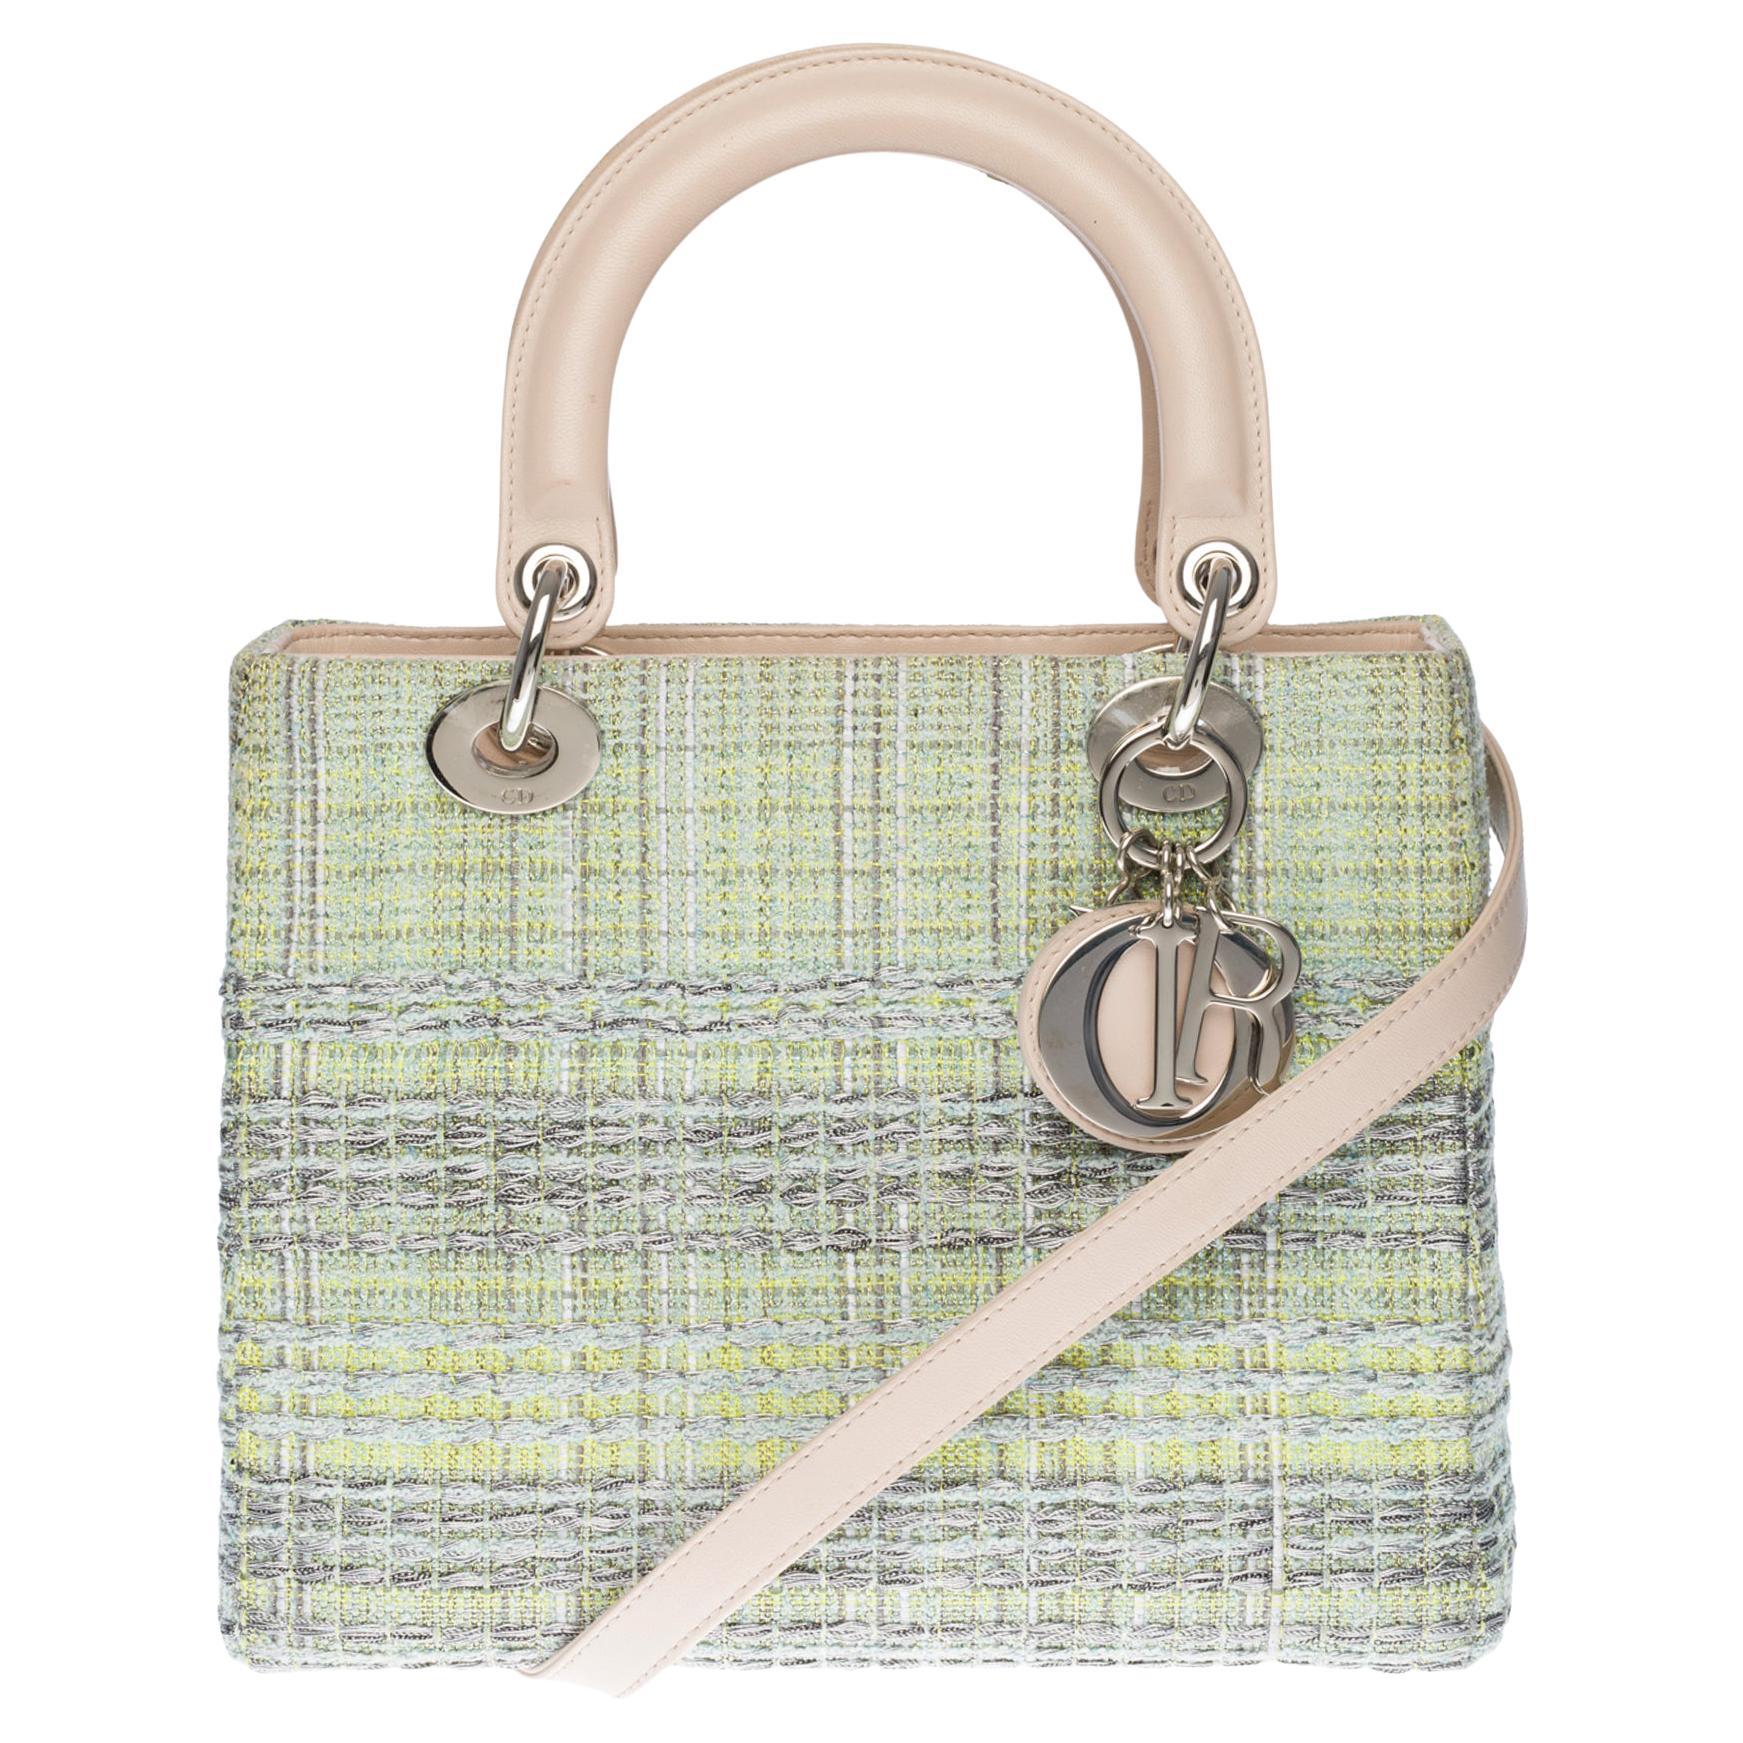 Limited Edition Lady Dior MM in Green Tweed and silver threads,SHW